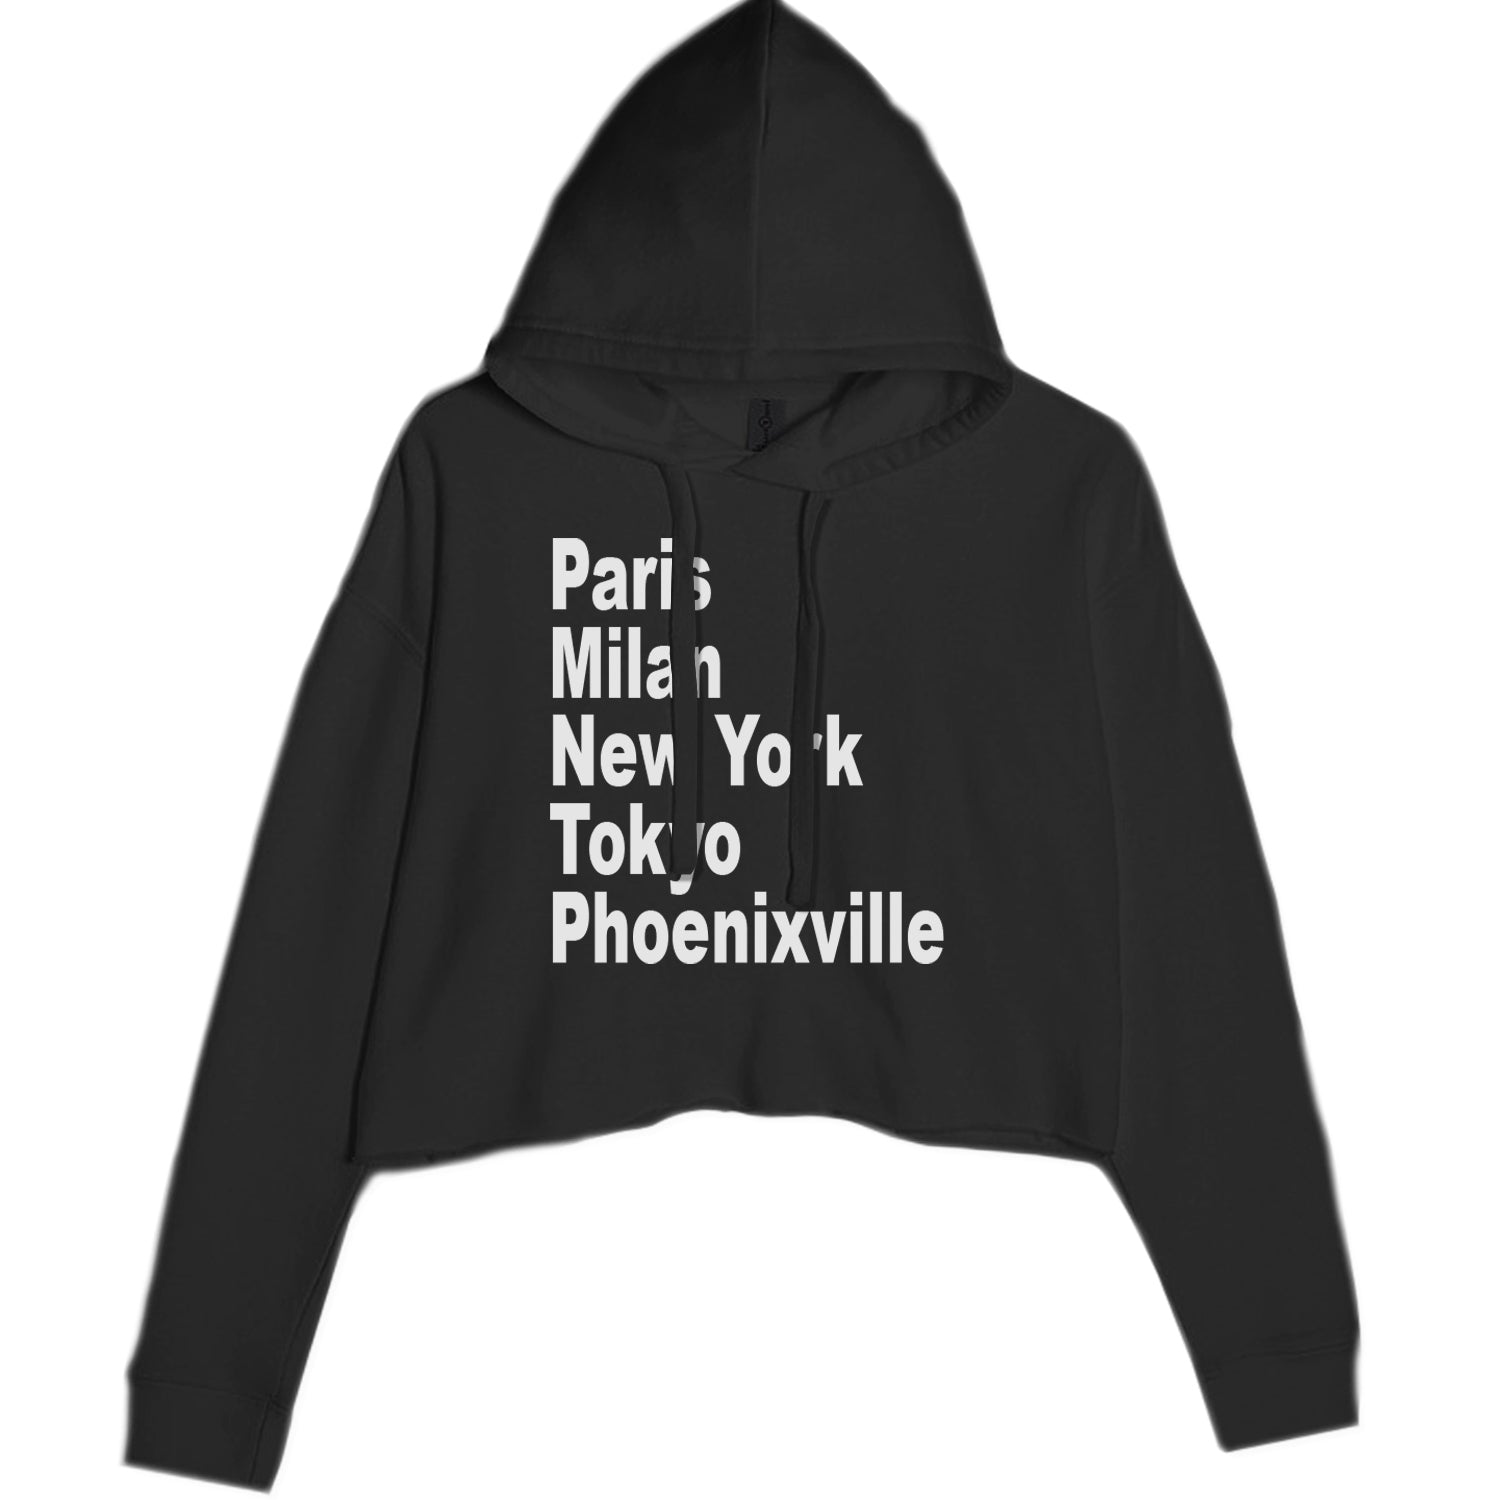 The Great Borough Of Phoenixville Cropped Hoodie Sweatshirt